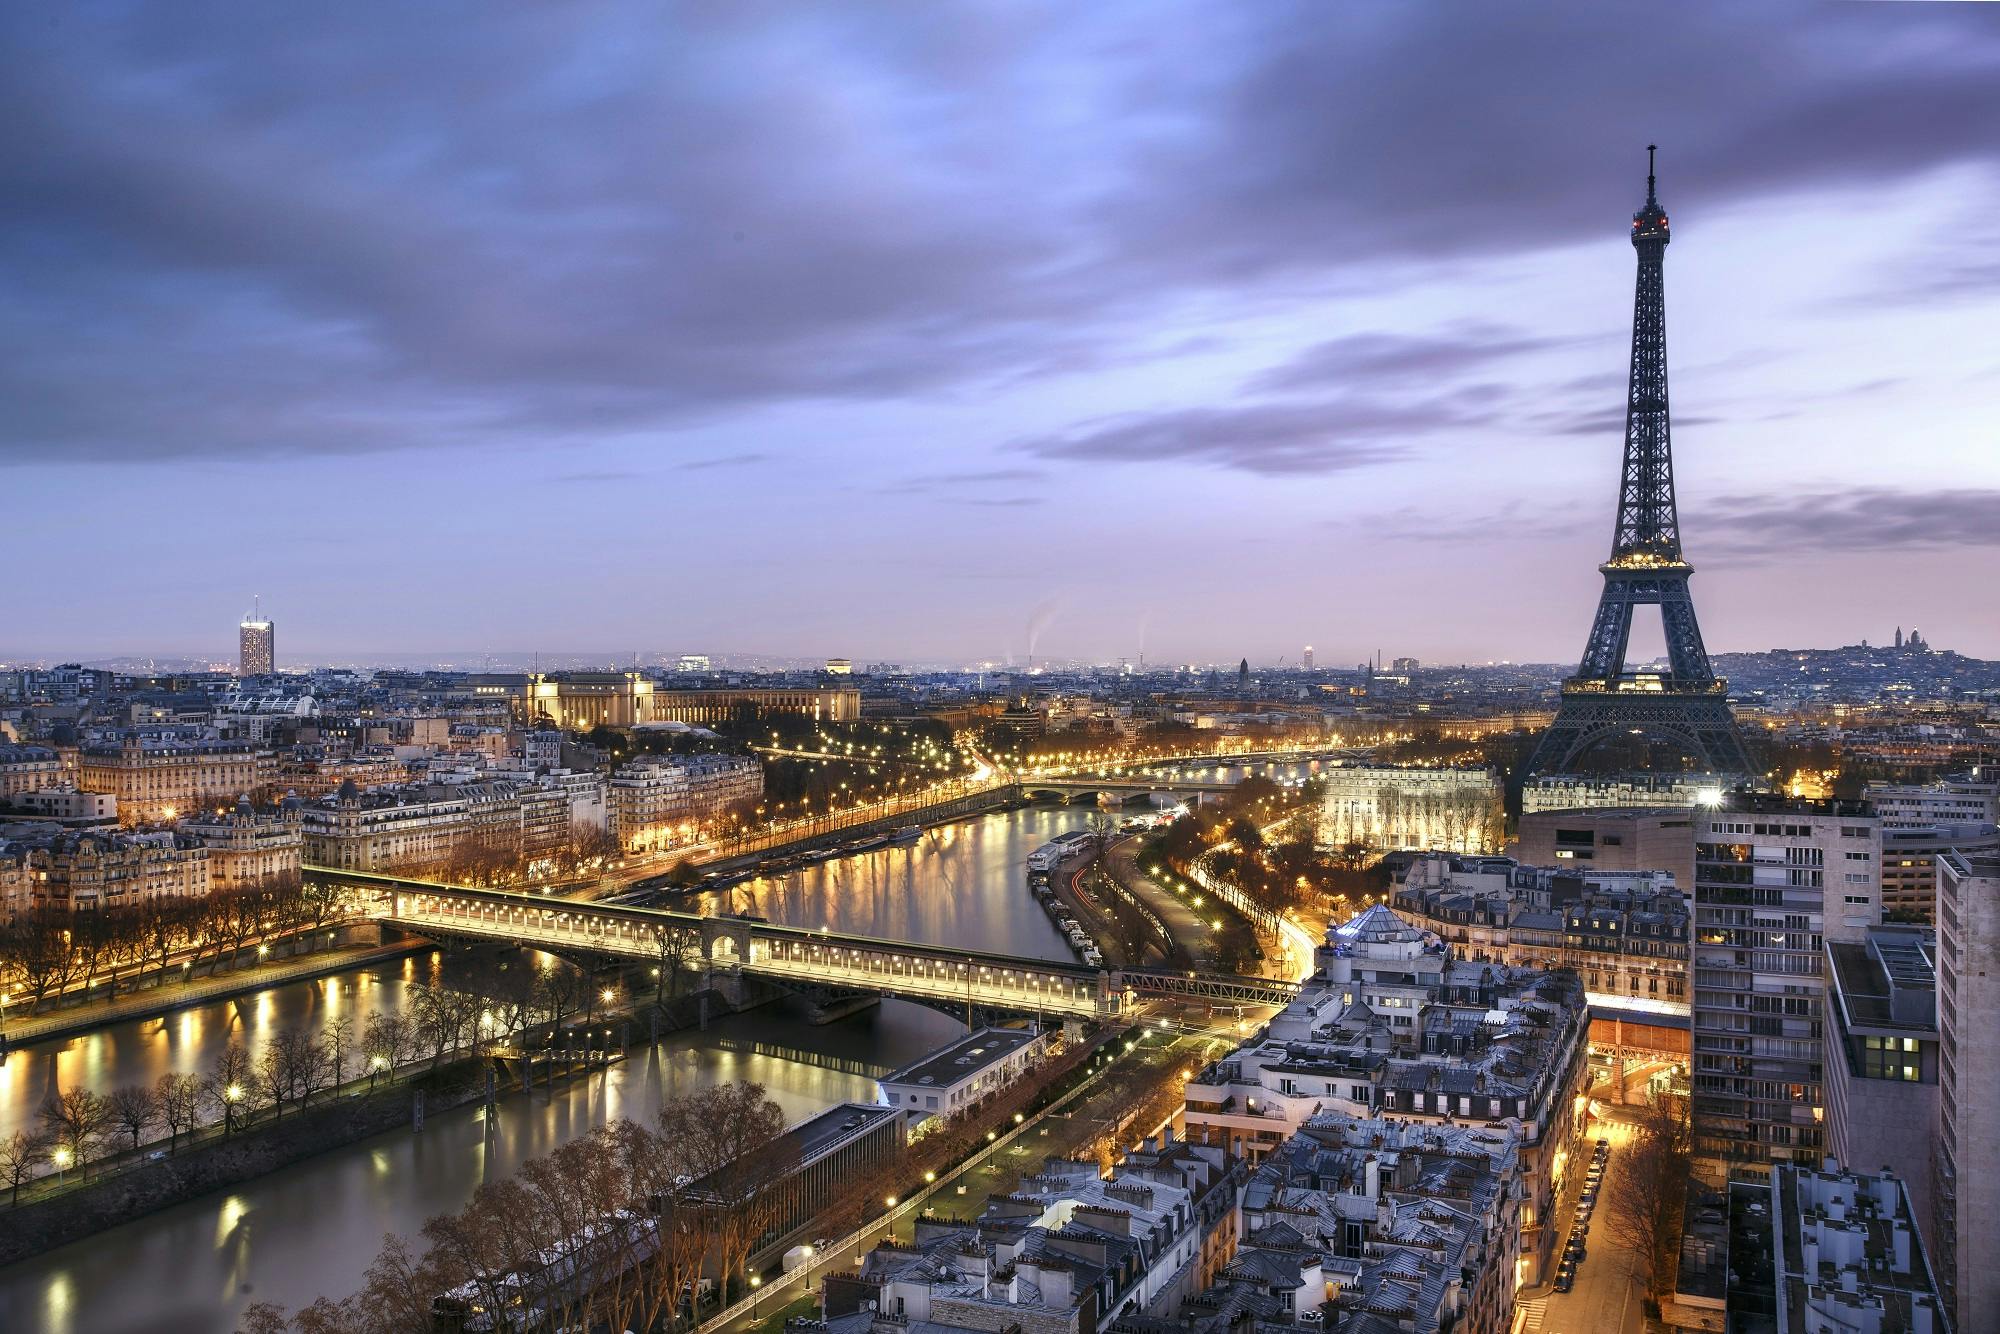 Combo tickets for Eiffel Tower and Evening Illuminations Cruise